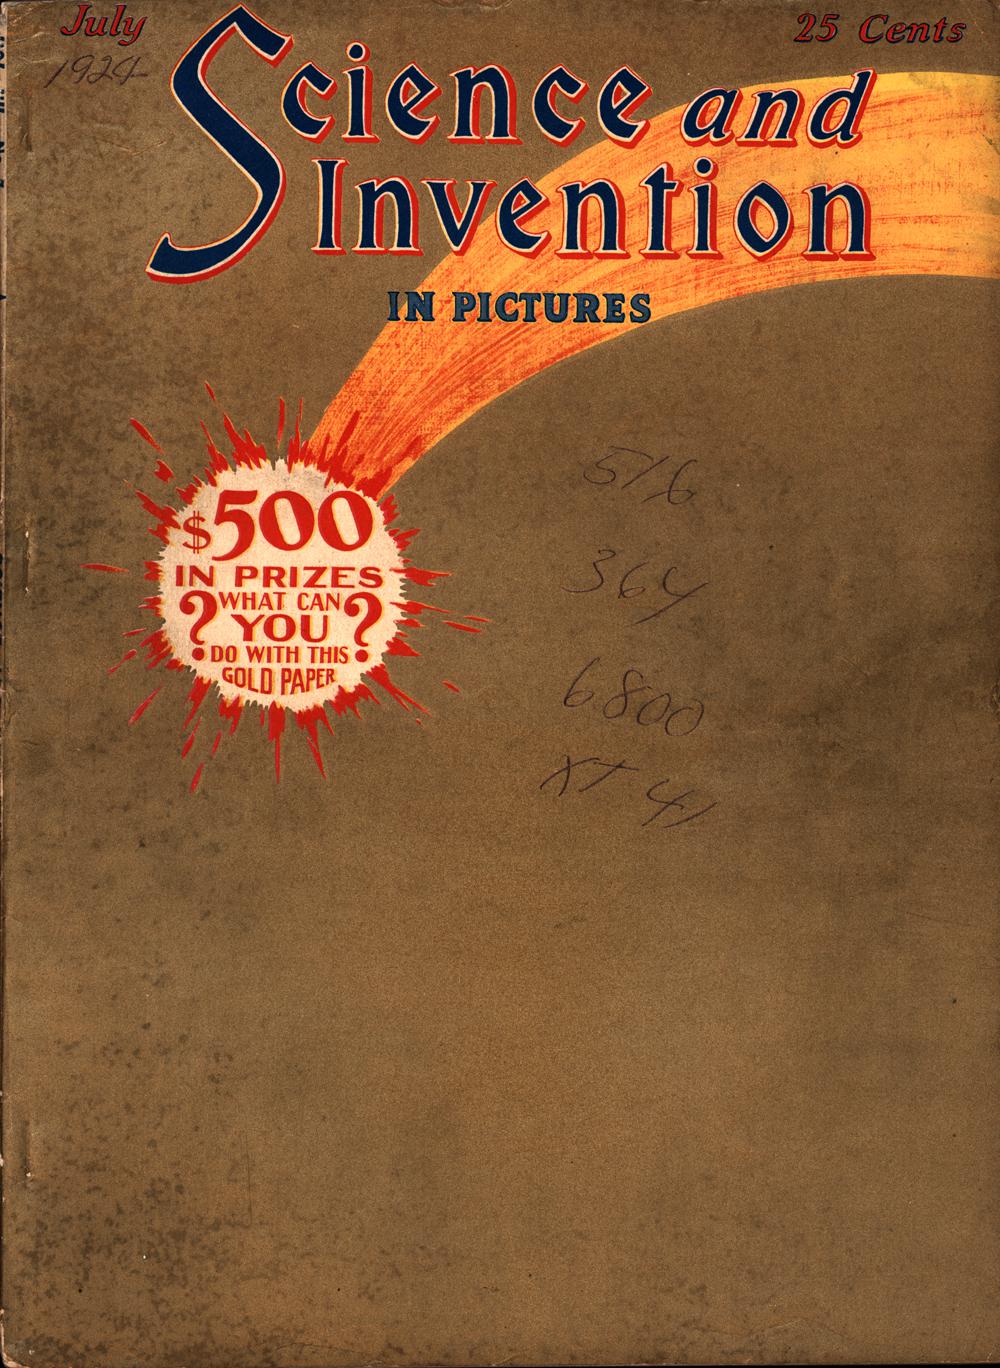 1924 - Science and invention - Vol. 12, No. 3